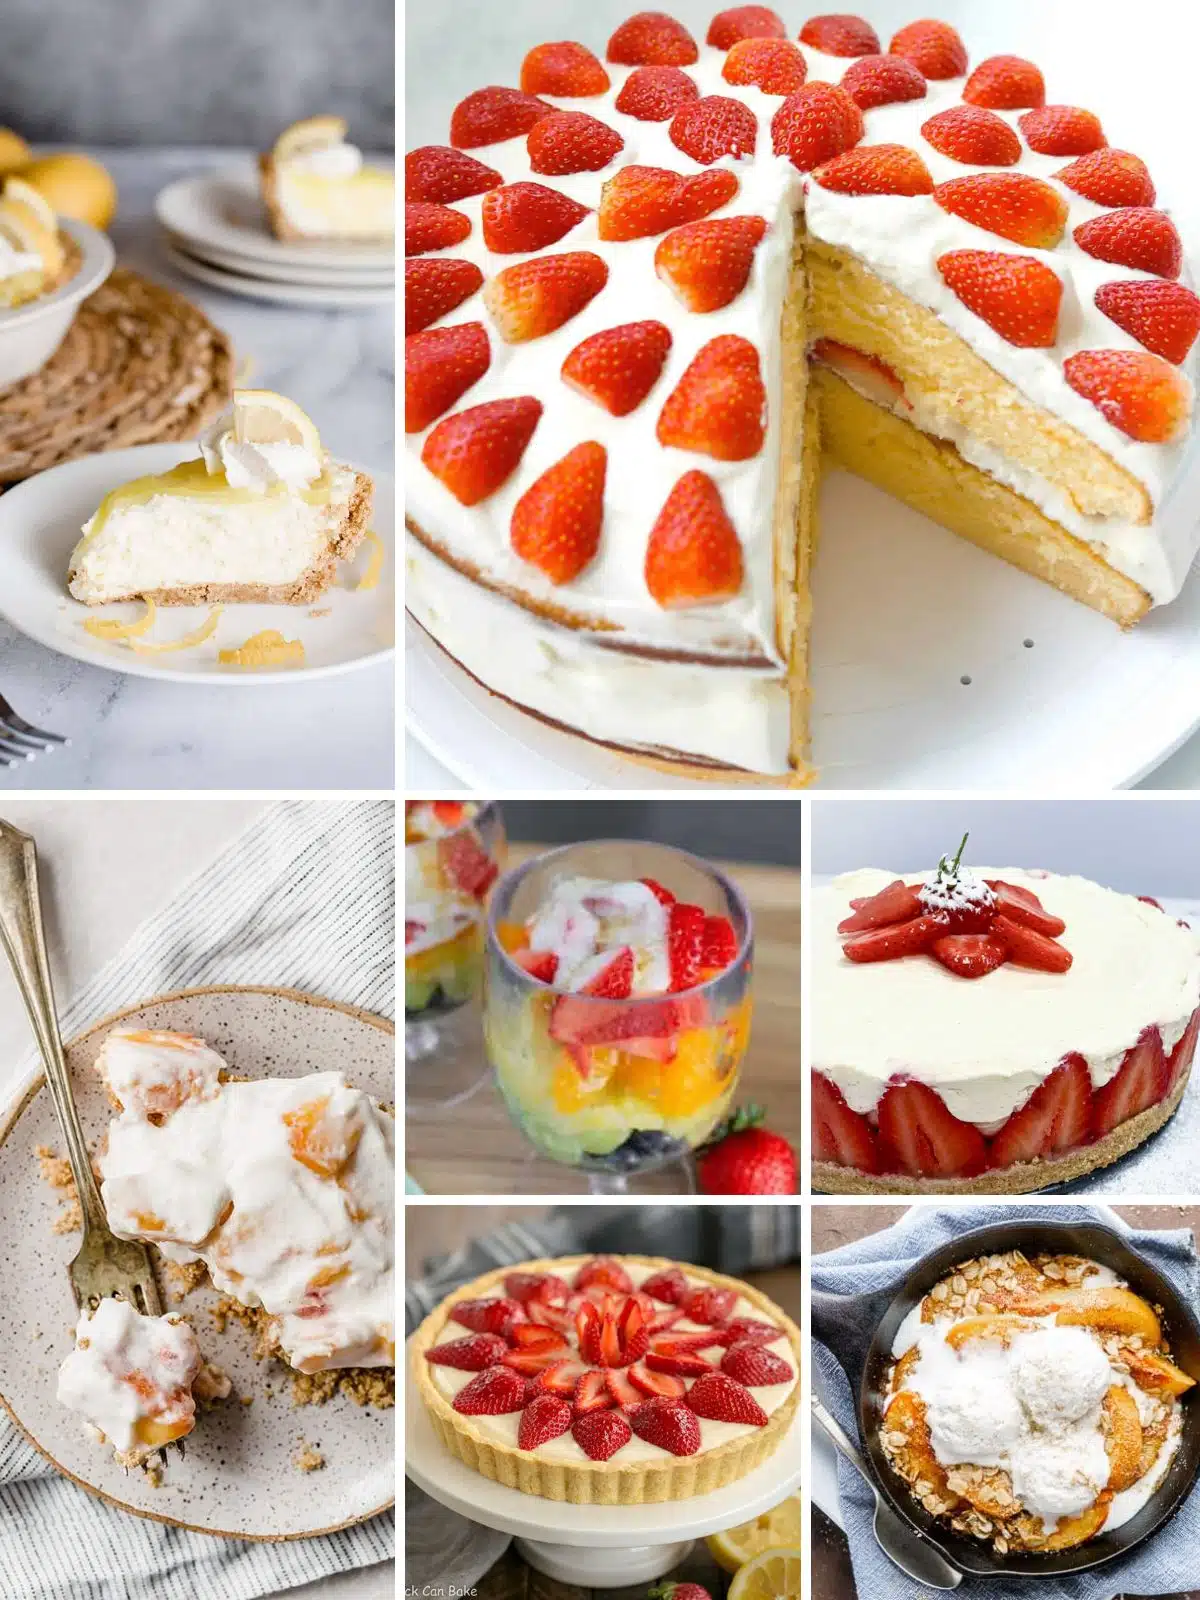 A collection of fruit desserts.